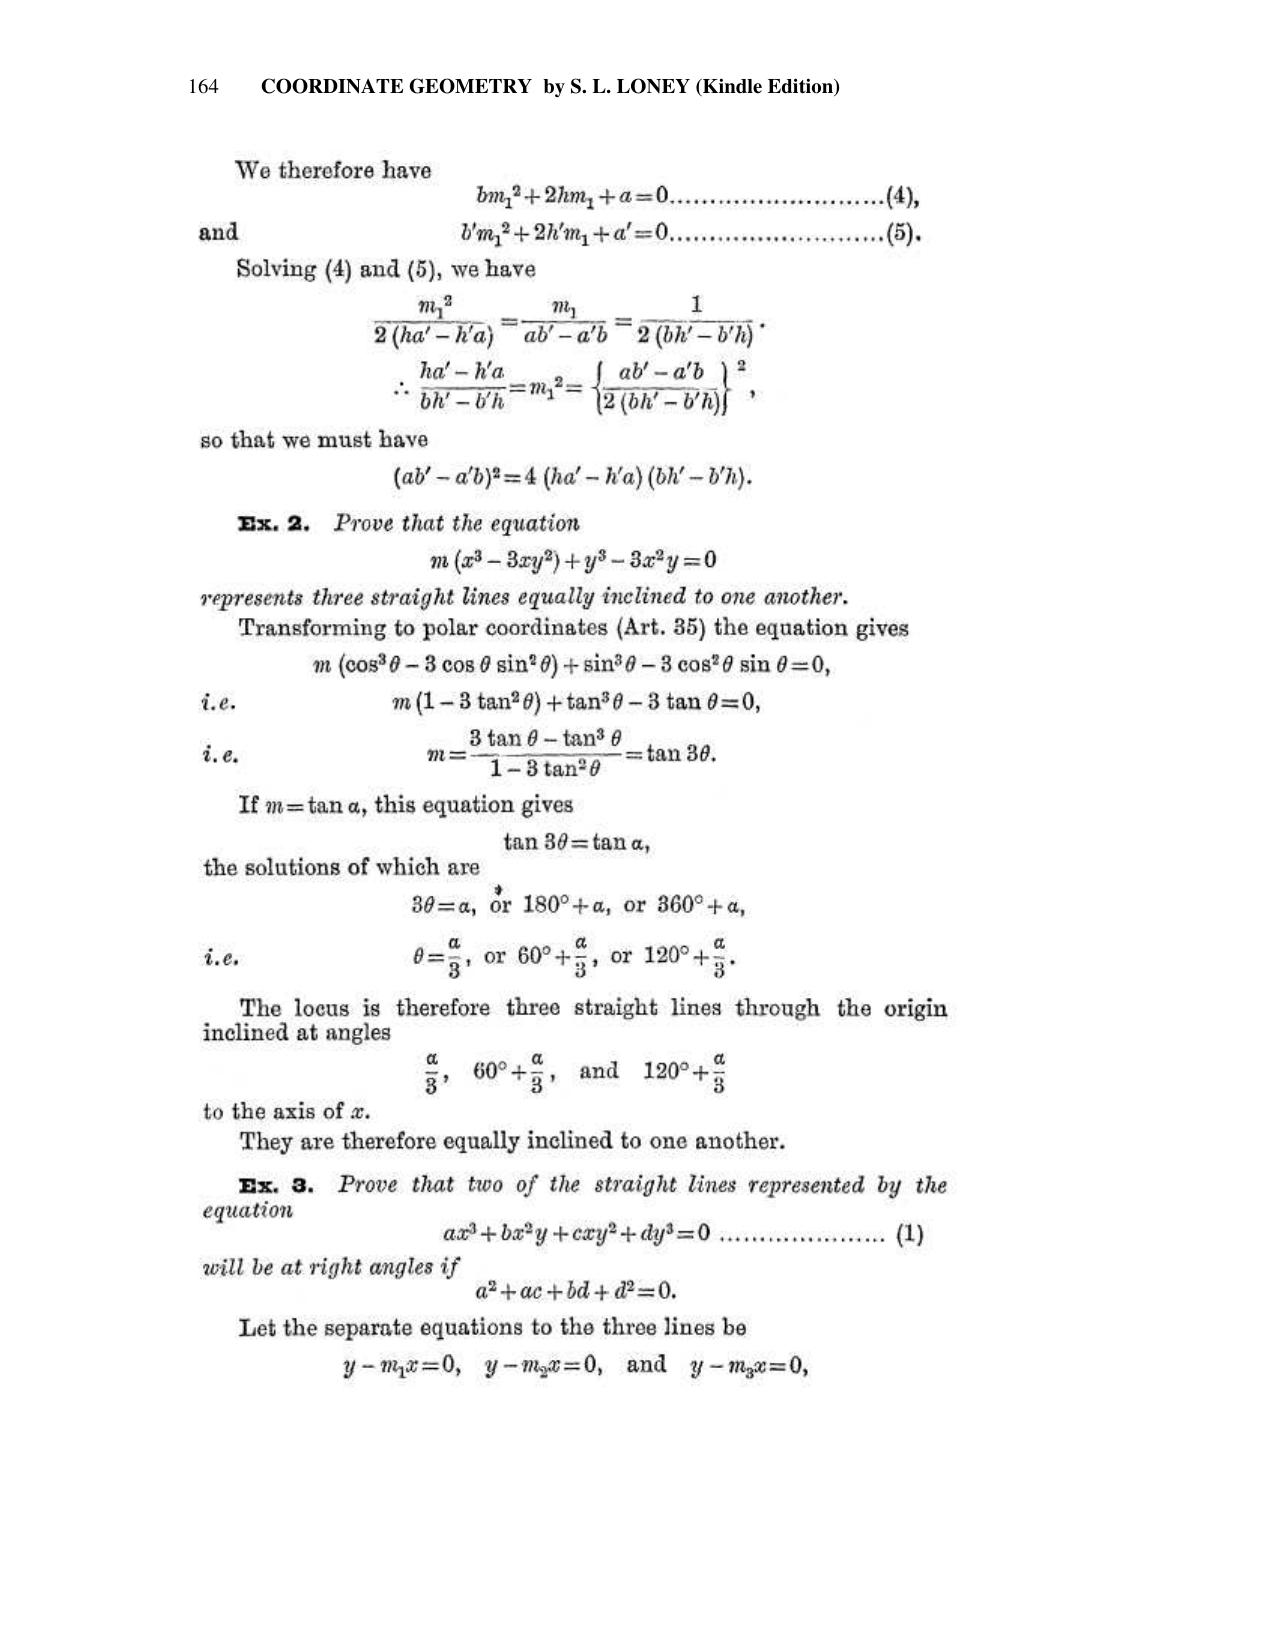 Chapter 6: On Equations Representing Two or More Straight Lines - SL Loney Solutions: The Elements of Coordinate Geometry - Page 25